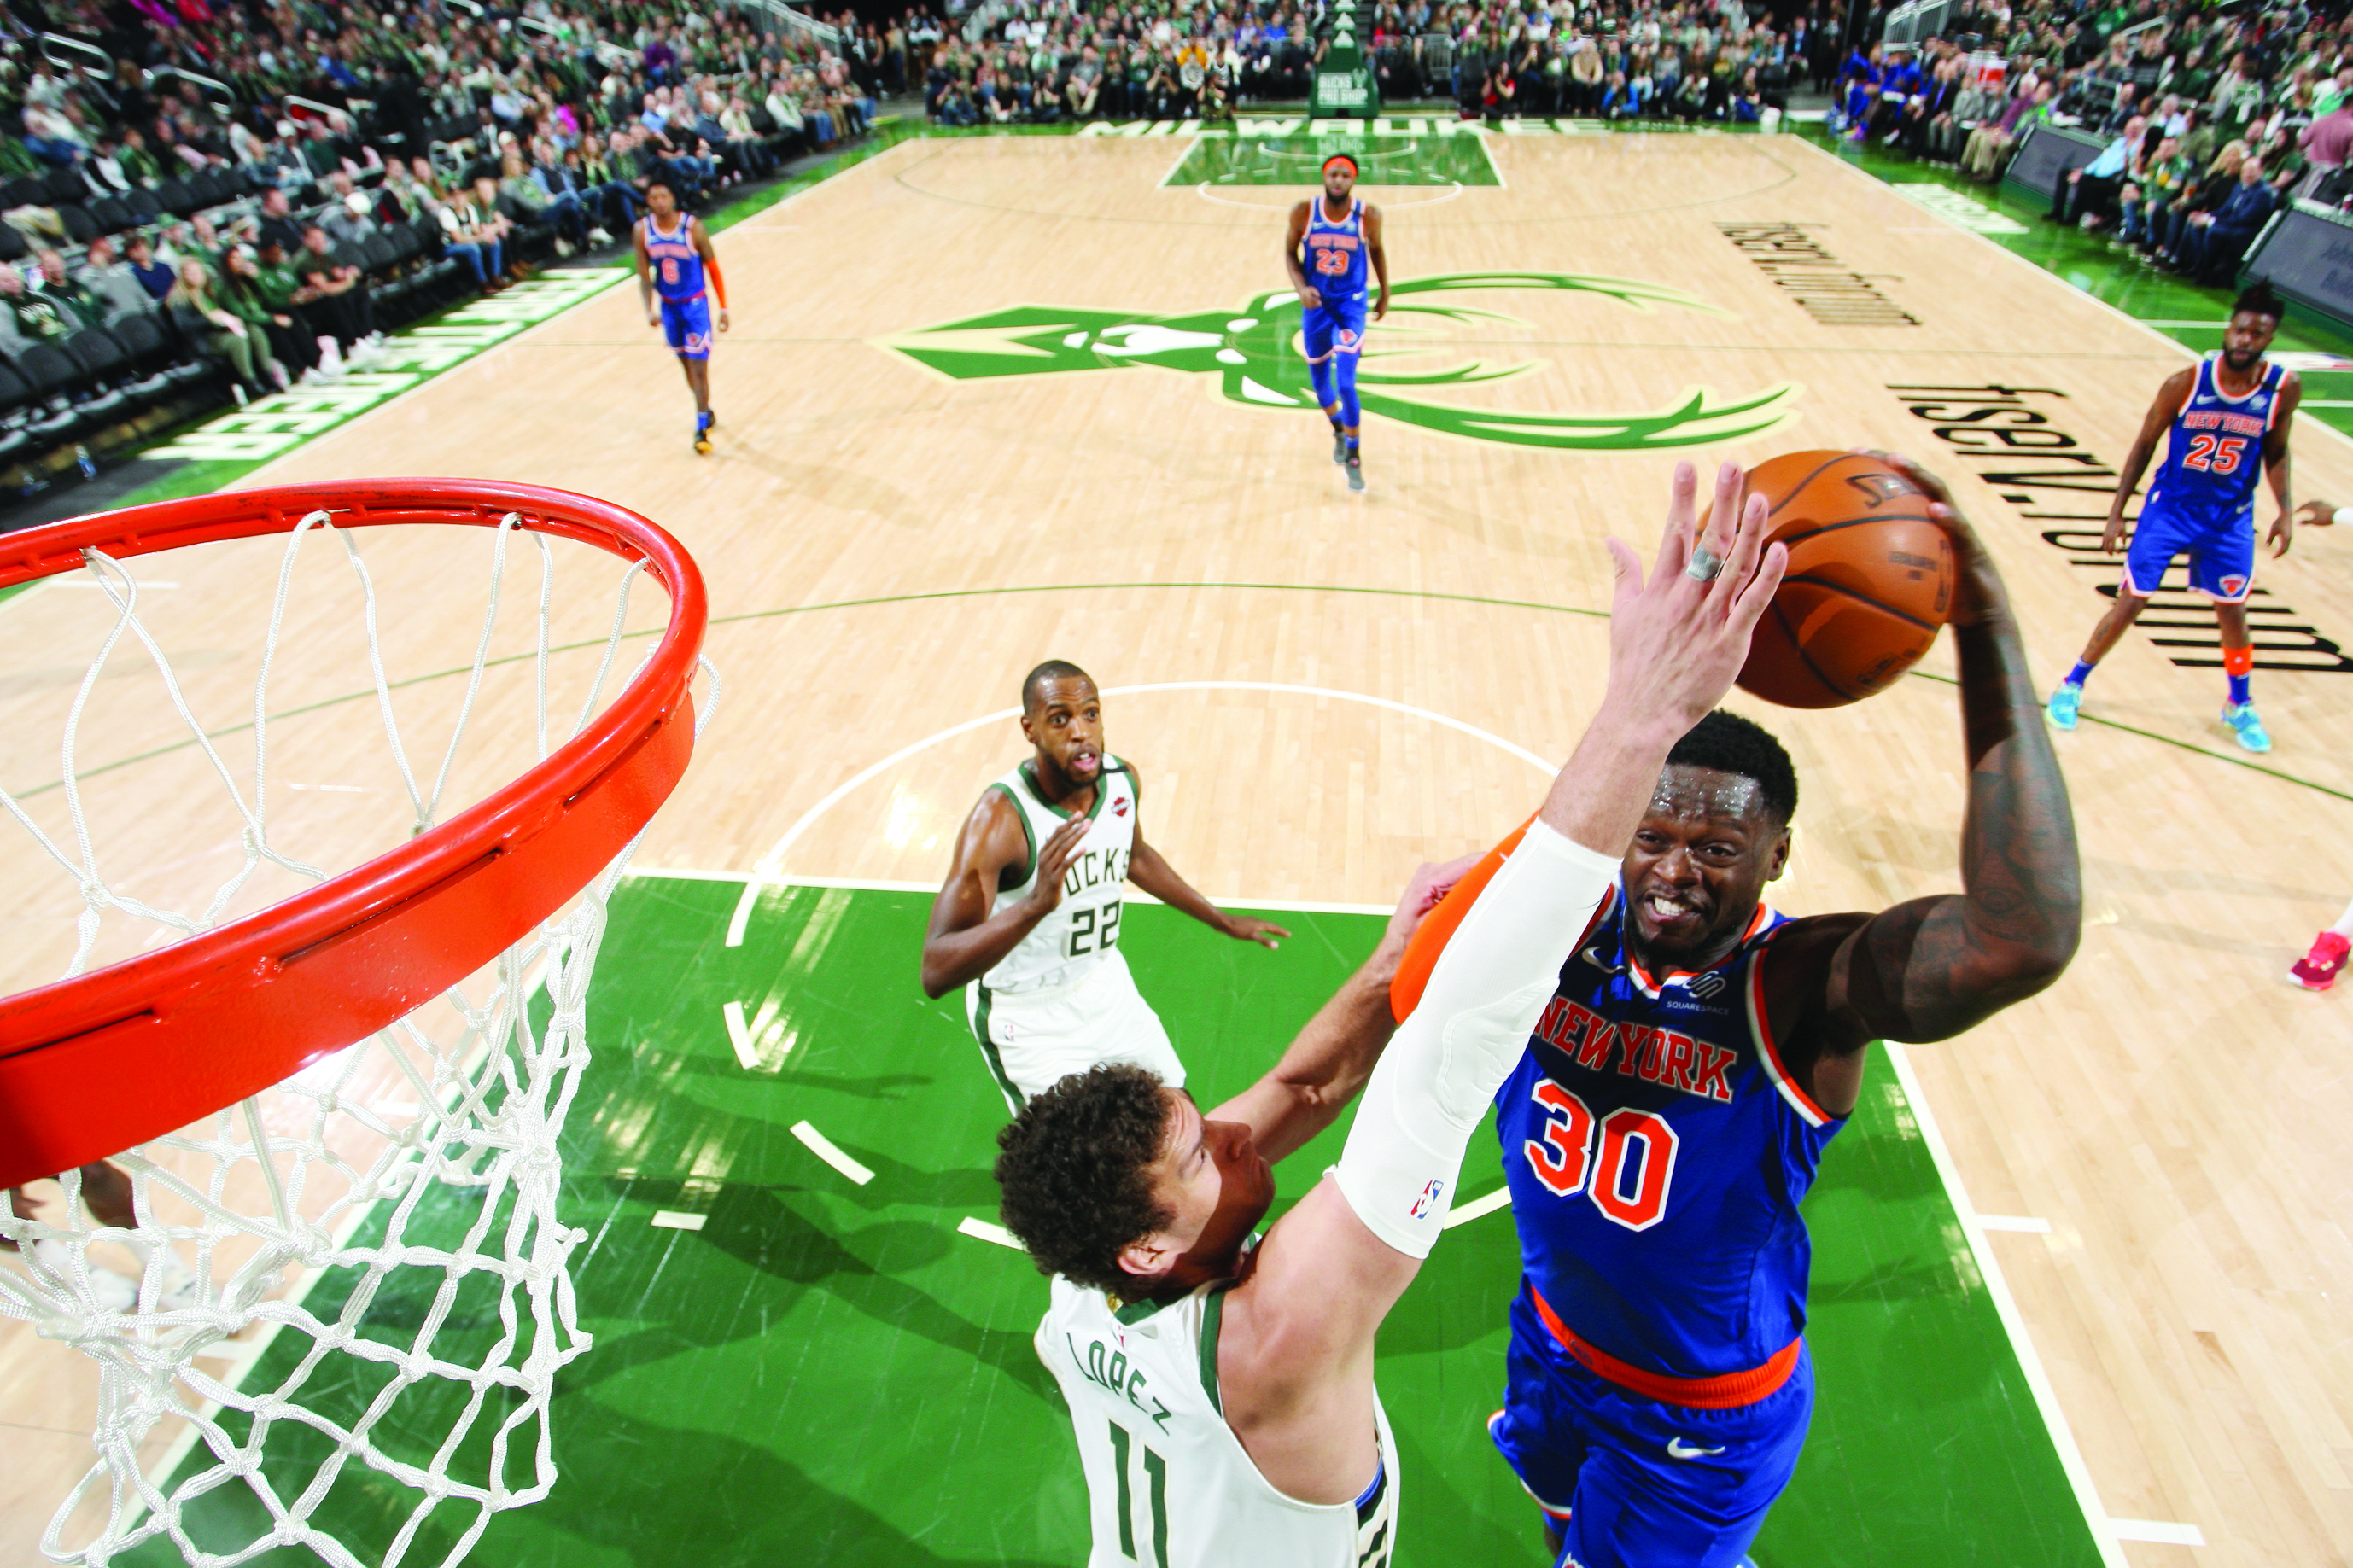 MILWAUKEE, WI - JANUARY 14: Julius Randle #30 of the New York Knicks shoots the ball against the Milwaukee Bucks on January 14, 2020 at the Fiserv Forum Center in Milwaukee, Wisconsin. NOTE TO USER: User expressly acknowledges and agrees that, by downloading and or using this Photograph, user is consenting to the terms and conditions of the Getty Images License Agreement. Mandatory Copyright Notice: Copyright 2020 NBAE   Gary Dineen/NBAE via Getty Images/AFP.